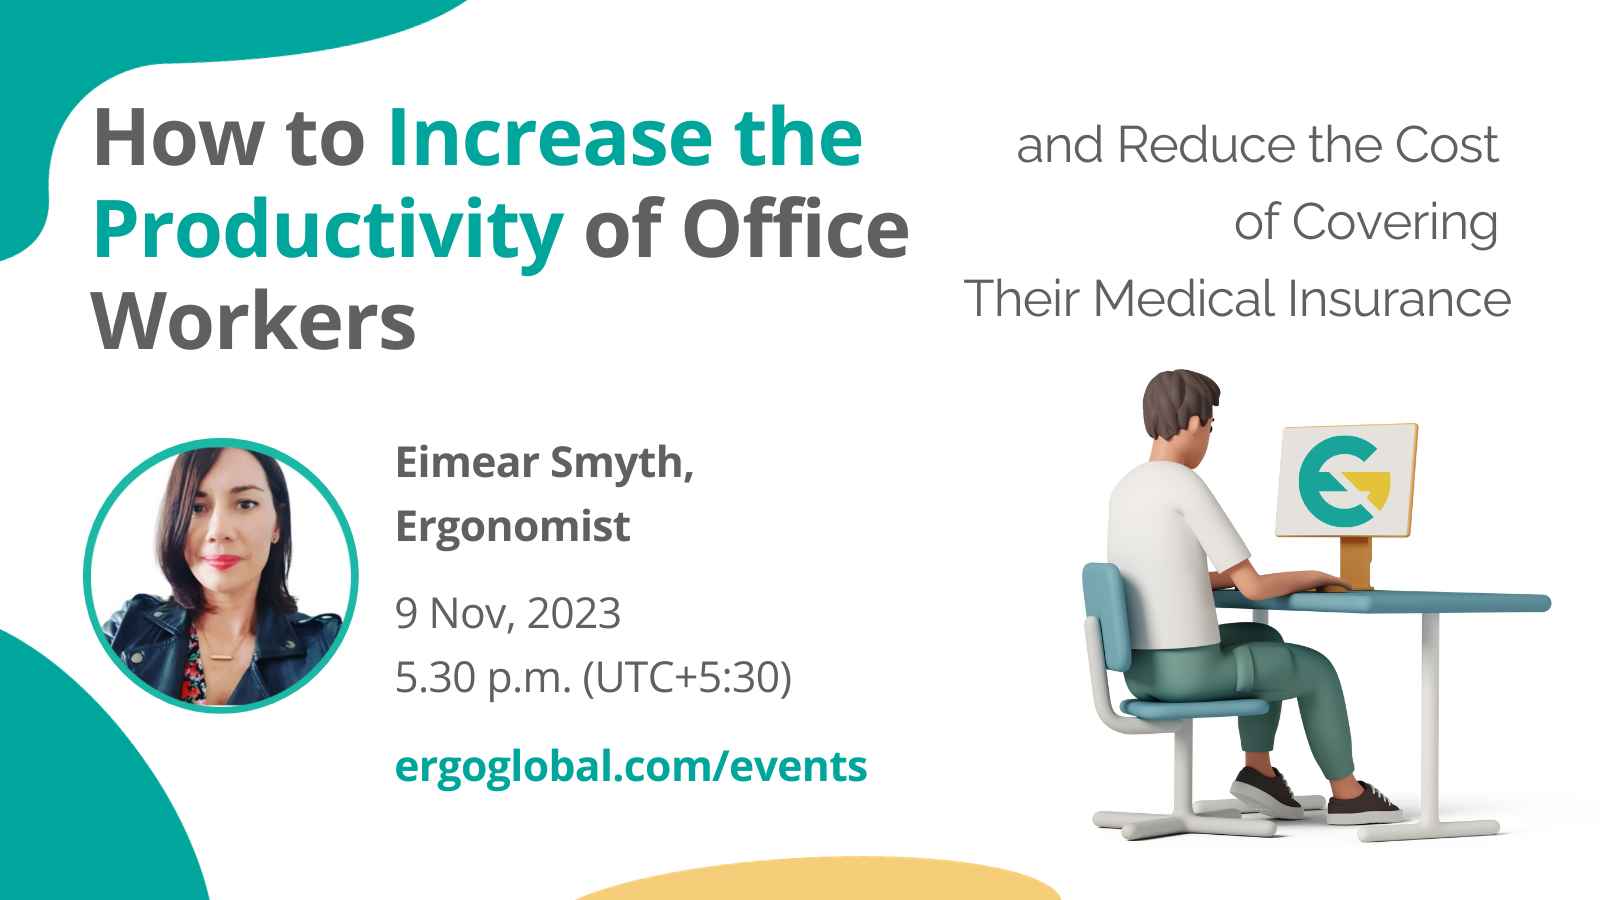 How to Increase the Productivity of Office Workers and Reduce the Cost of Covering Their Medical Insurance thanks to the implementation of ergonomic rules and standards.